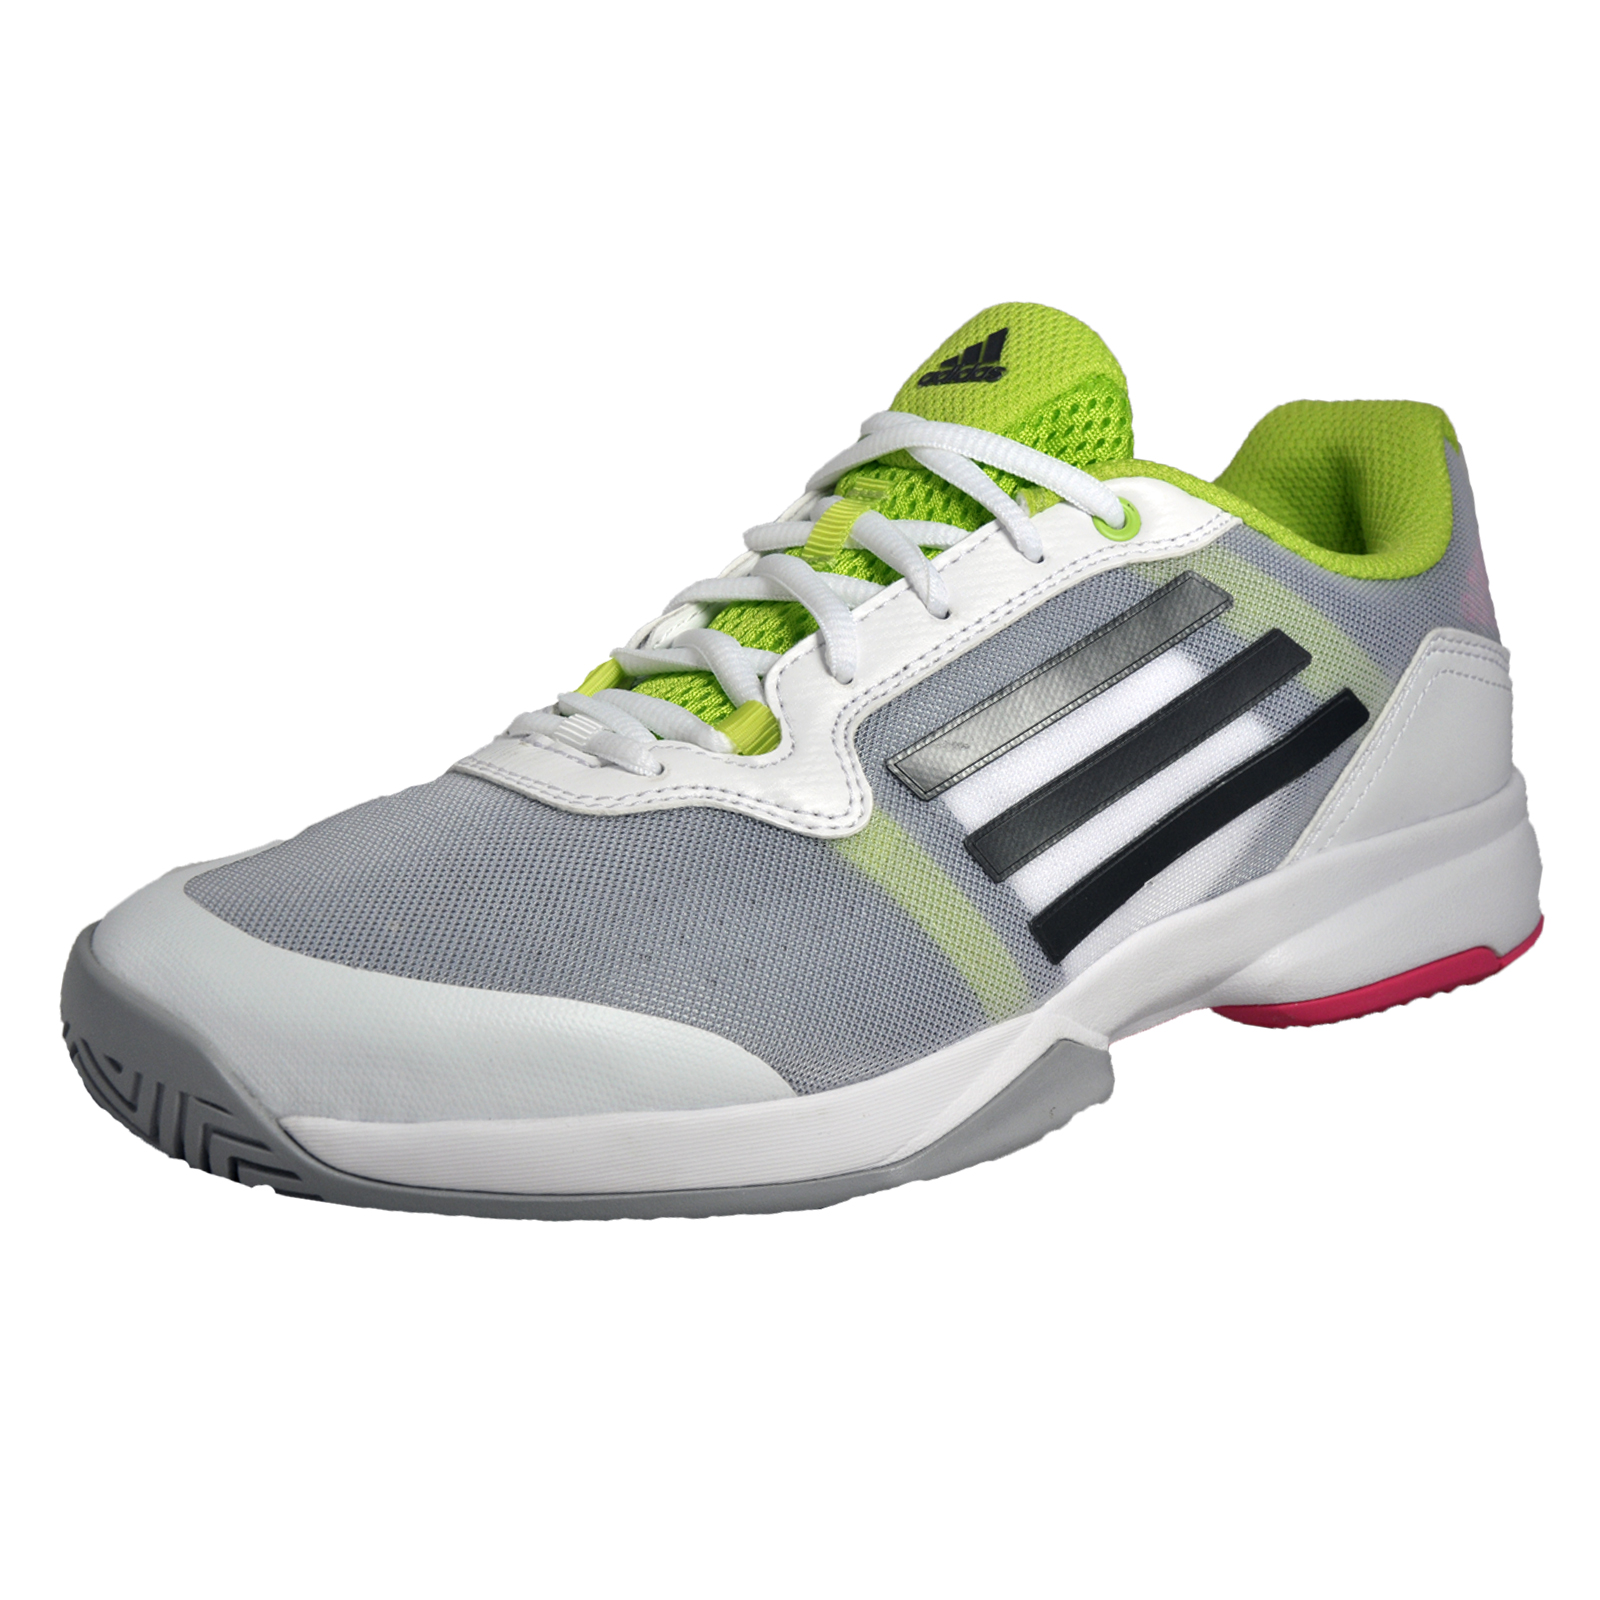 Adidas Sonic Court Mens Tennis Shoes Casual Court Trainers White | eBay